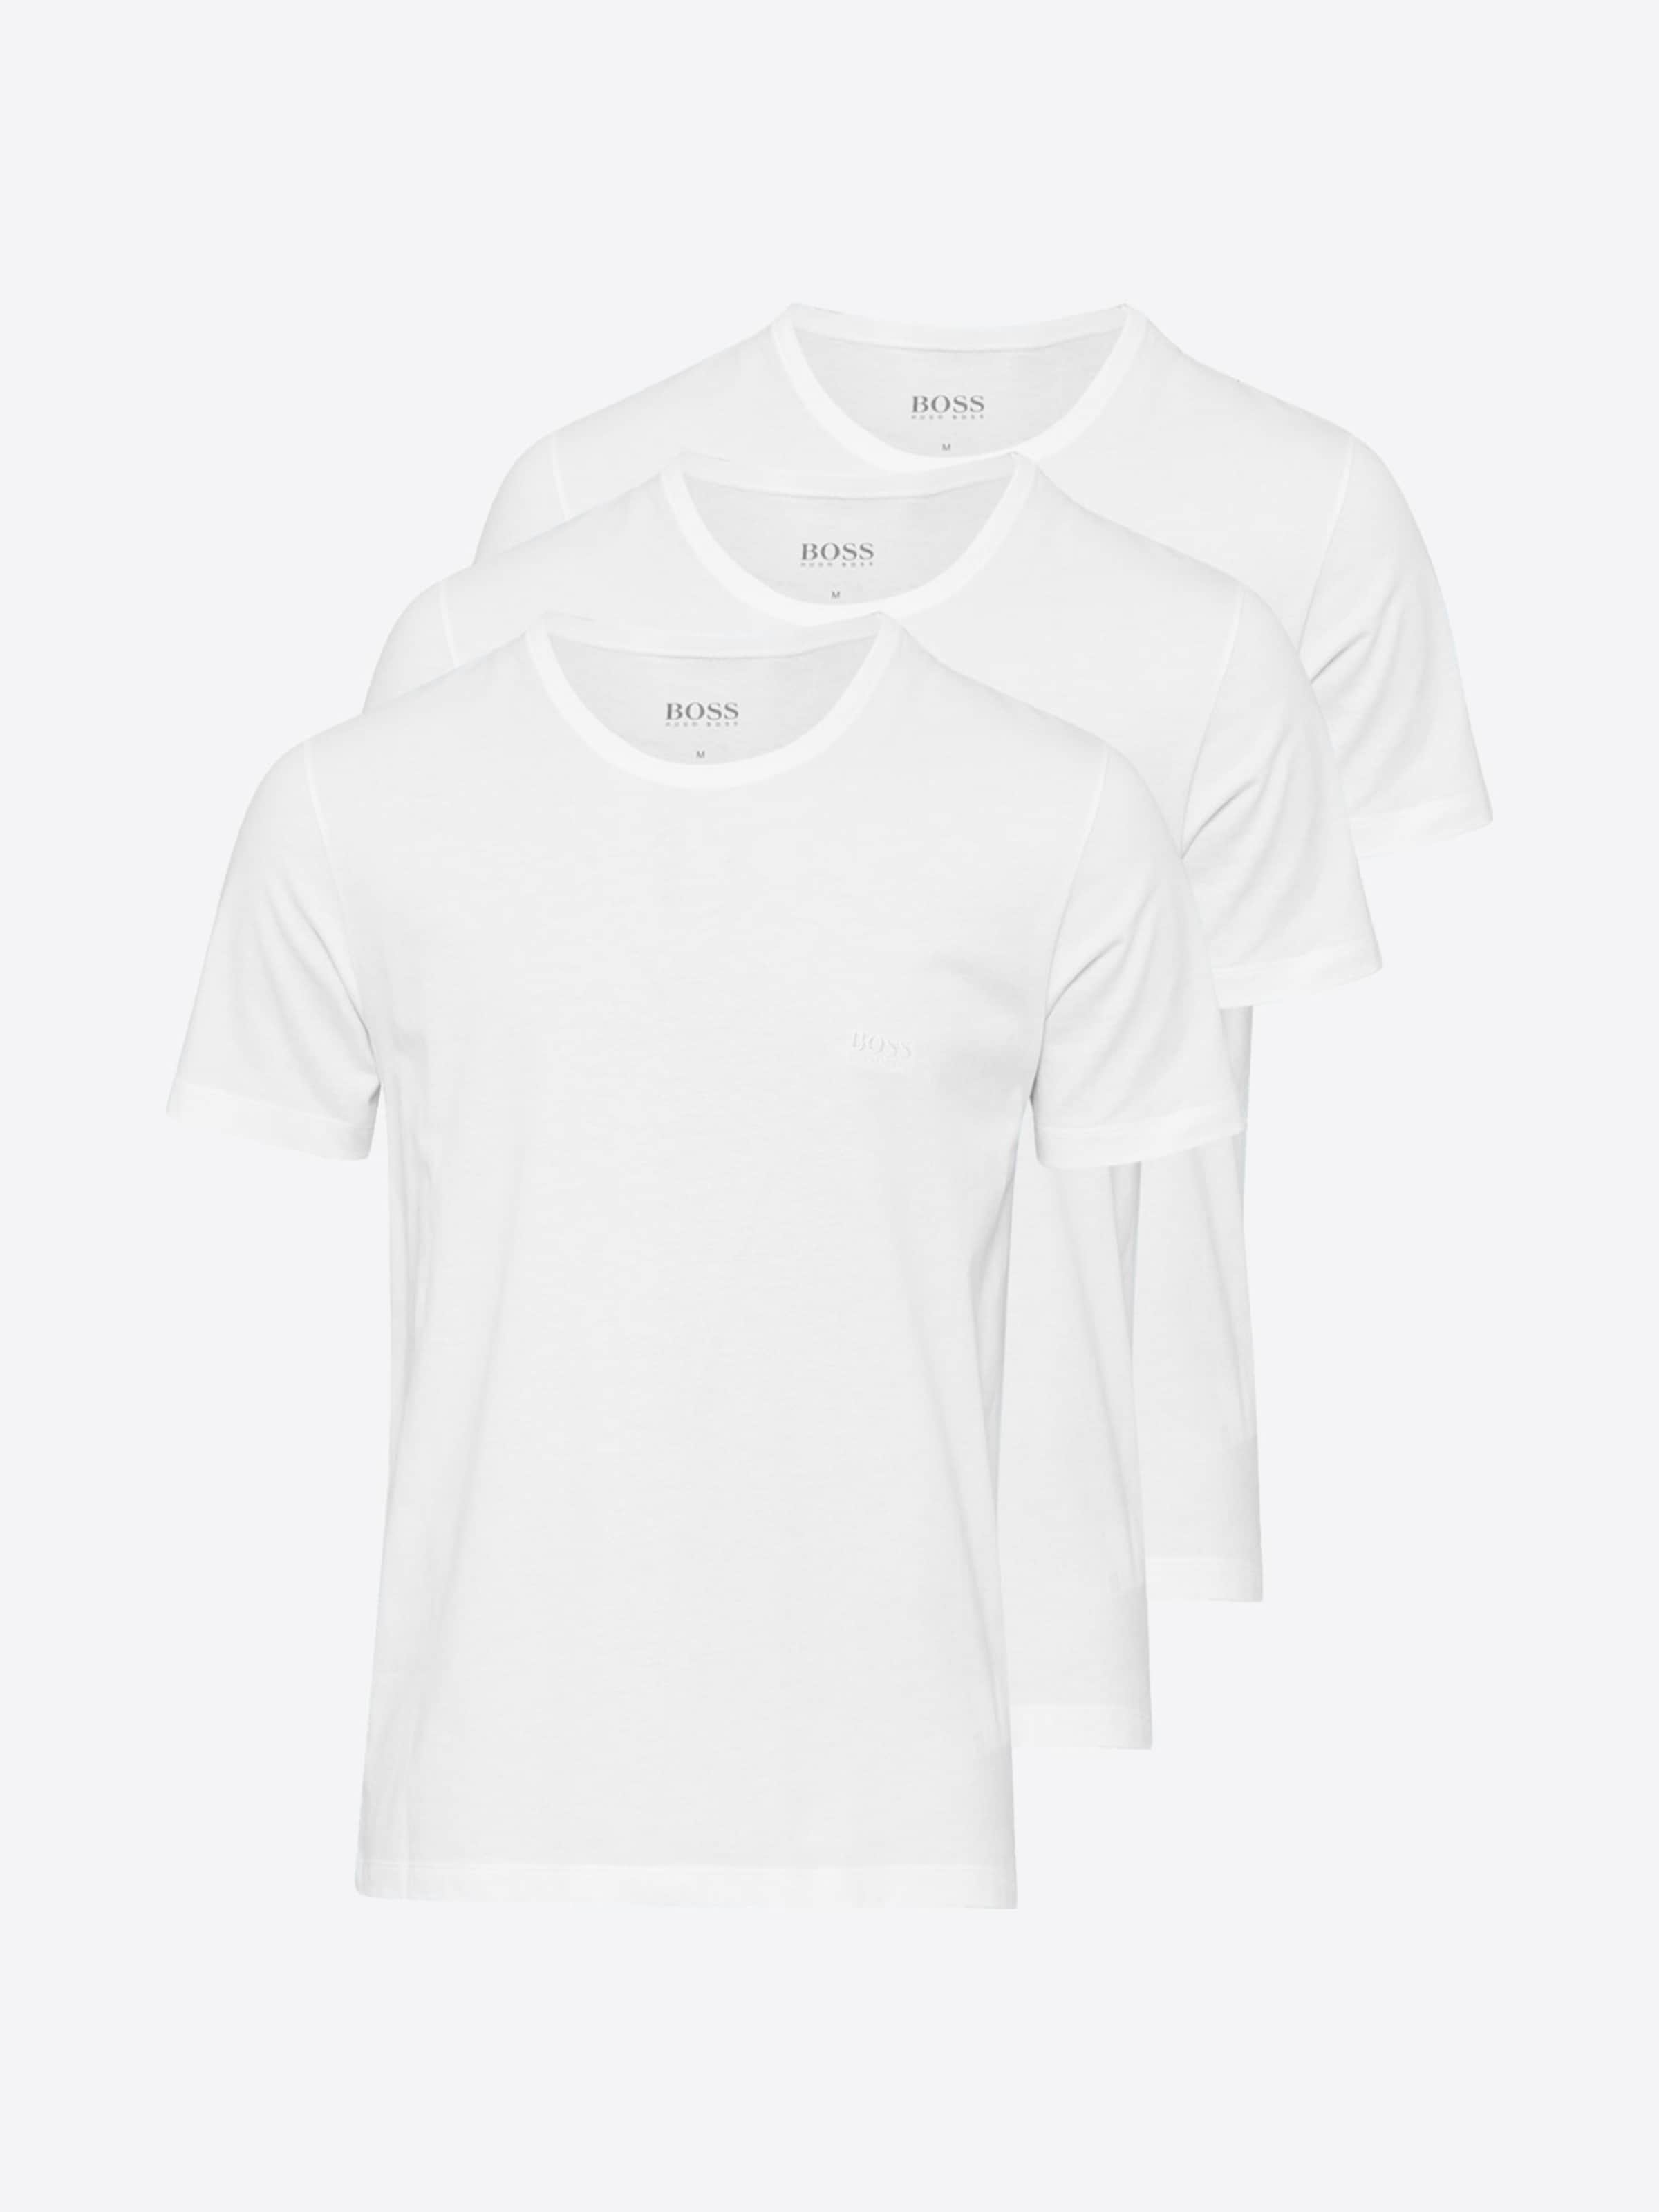 BOSS Casual T-Shirt in Offwhite 